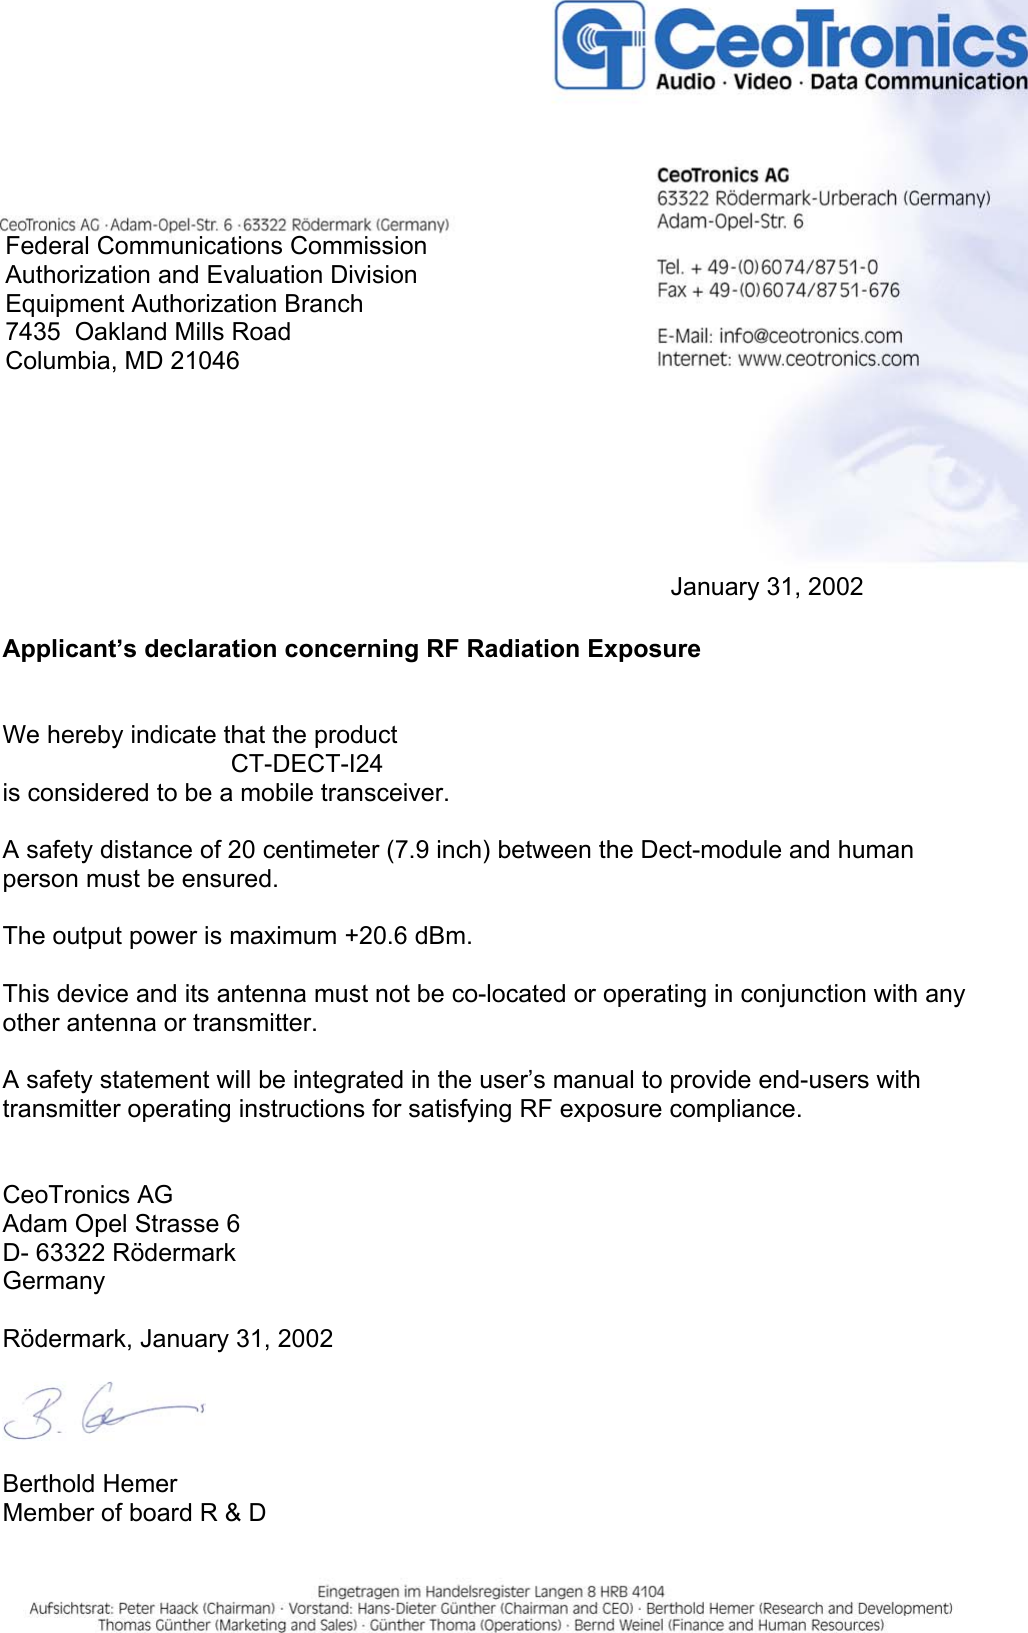 Federal Communications CommissionAuthorization and Evaluation DivisionEquipment Authorization Branch7435  Oakland Mills RoadColumbia, MD 21046January 31, 2002Applicant’s declaration concerning RF Radiation ExposureWe hereby indicate that the product CT-DECT-I24is considered to be a mobile transceiver.A safety distance of 20 centimeter (7.9 inch) between the Dect-module and humanperson must be ensured.The output power is maximum +20.6 dBm.This device and its antenna must not be co-located or operating in conjunction with anyother antenna or transmitter.A safety statement will be integrated in the user’s manual to provide end-users withtransmitter operating instructions for satisfying RF exposure compliance.CeoTronics AGAdam Opel Strasse 6D- 63322 RödermarkGermanyRödermark, January 31, 2002Berthold HemerMember of board R &amp; D